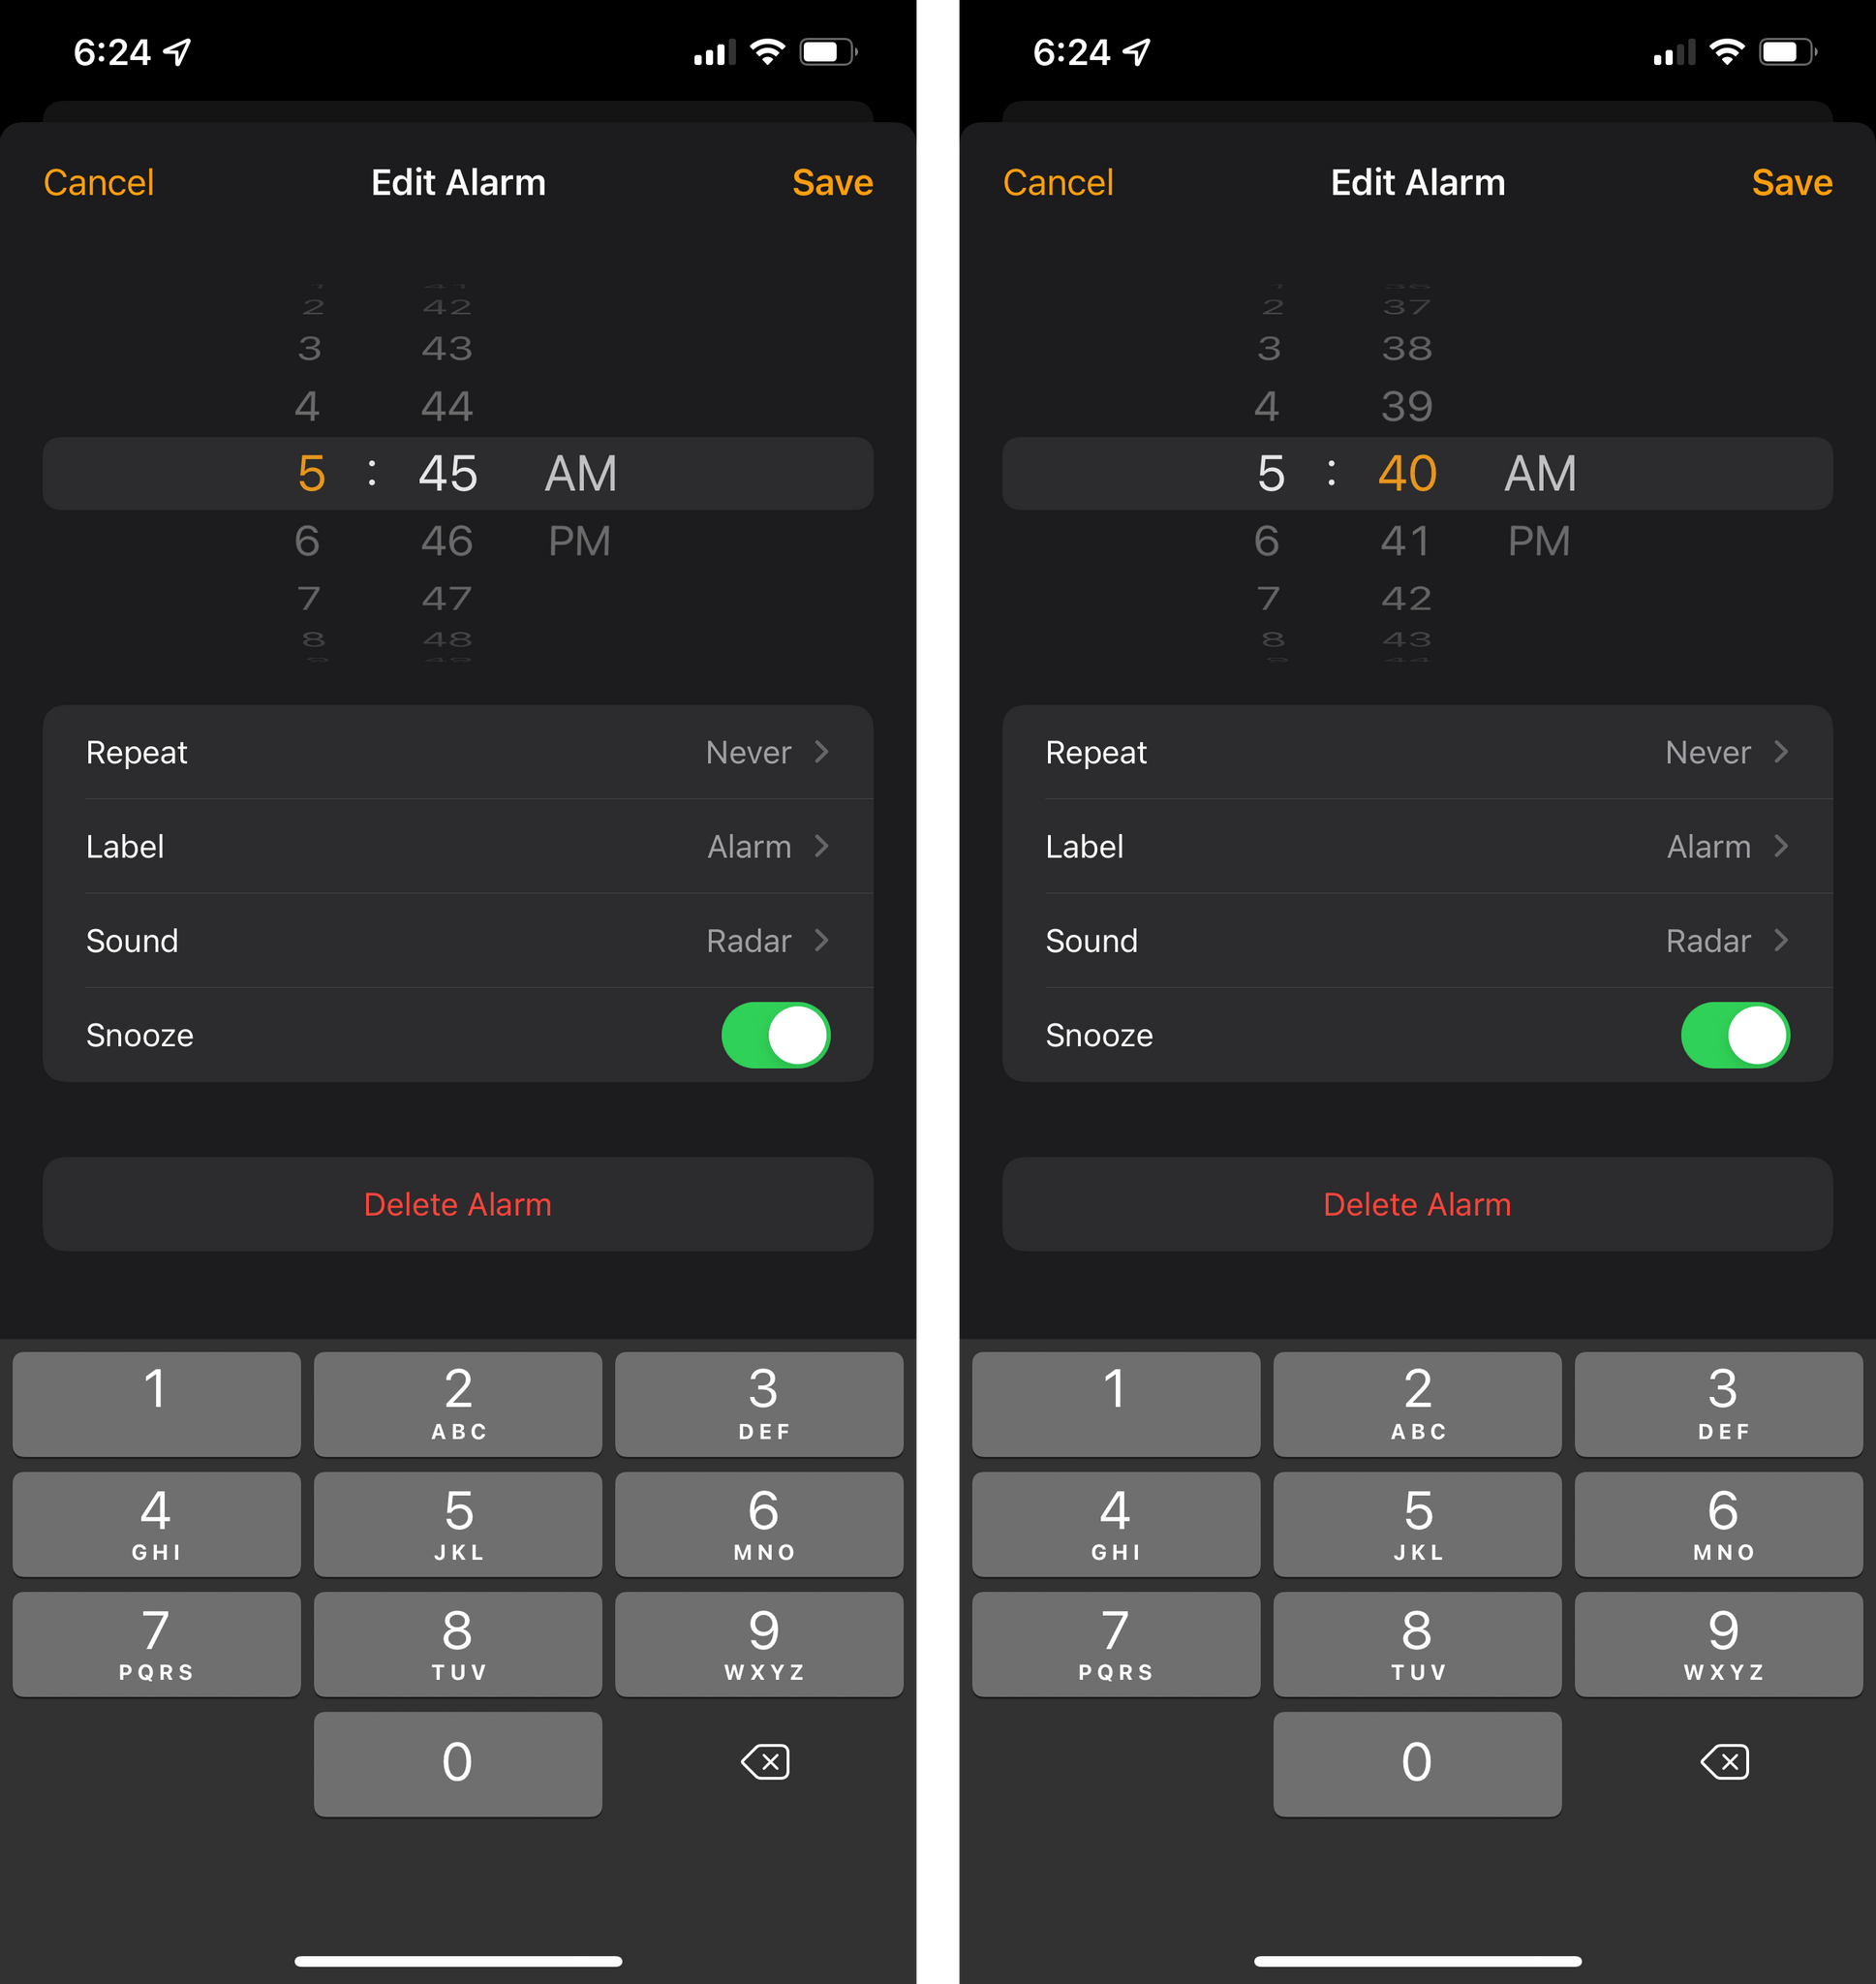 You can select hours and minutes by tapping them.